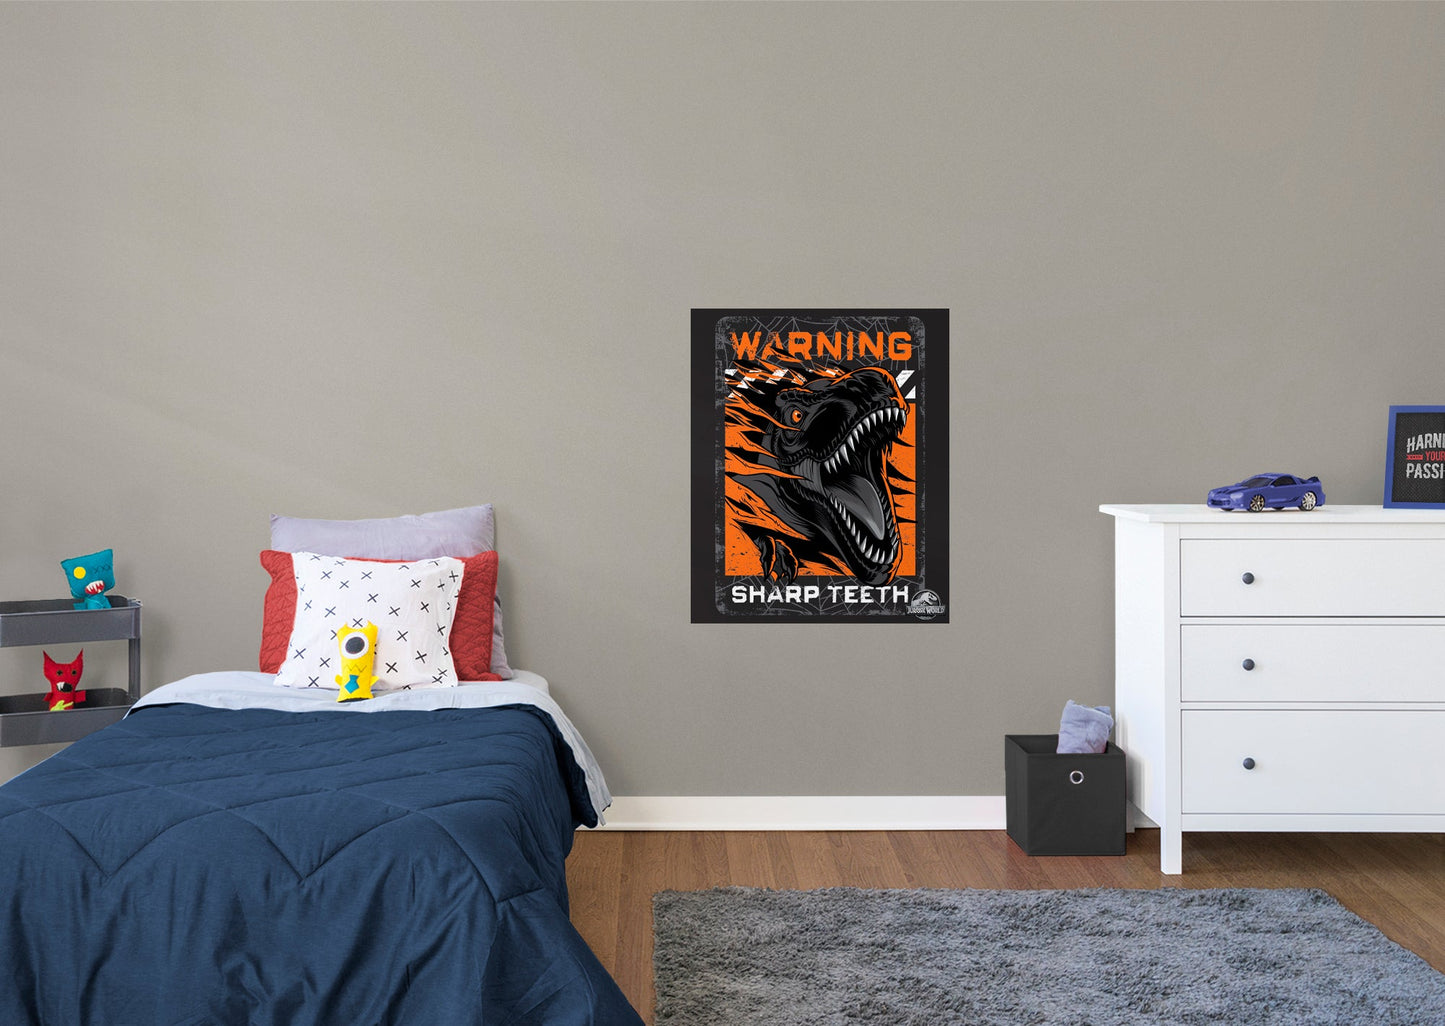 Jurassic World:  Warning Sharp Teeth Mural        - Officially Licensed NBC Universal Removable Wall   Adhesive Decal